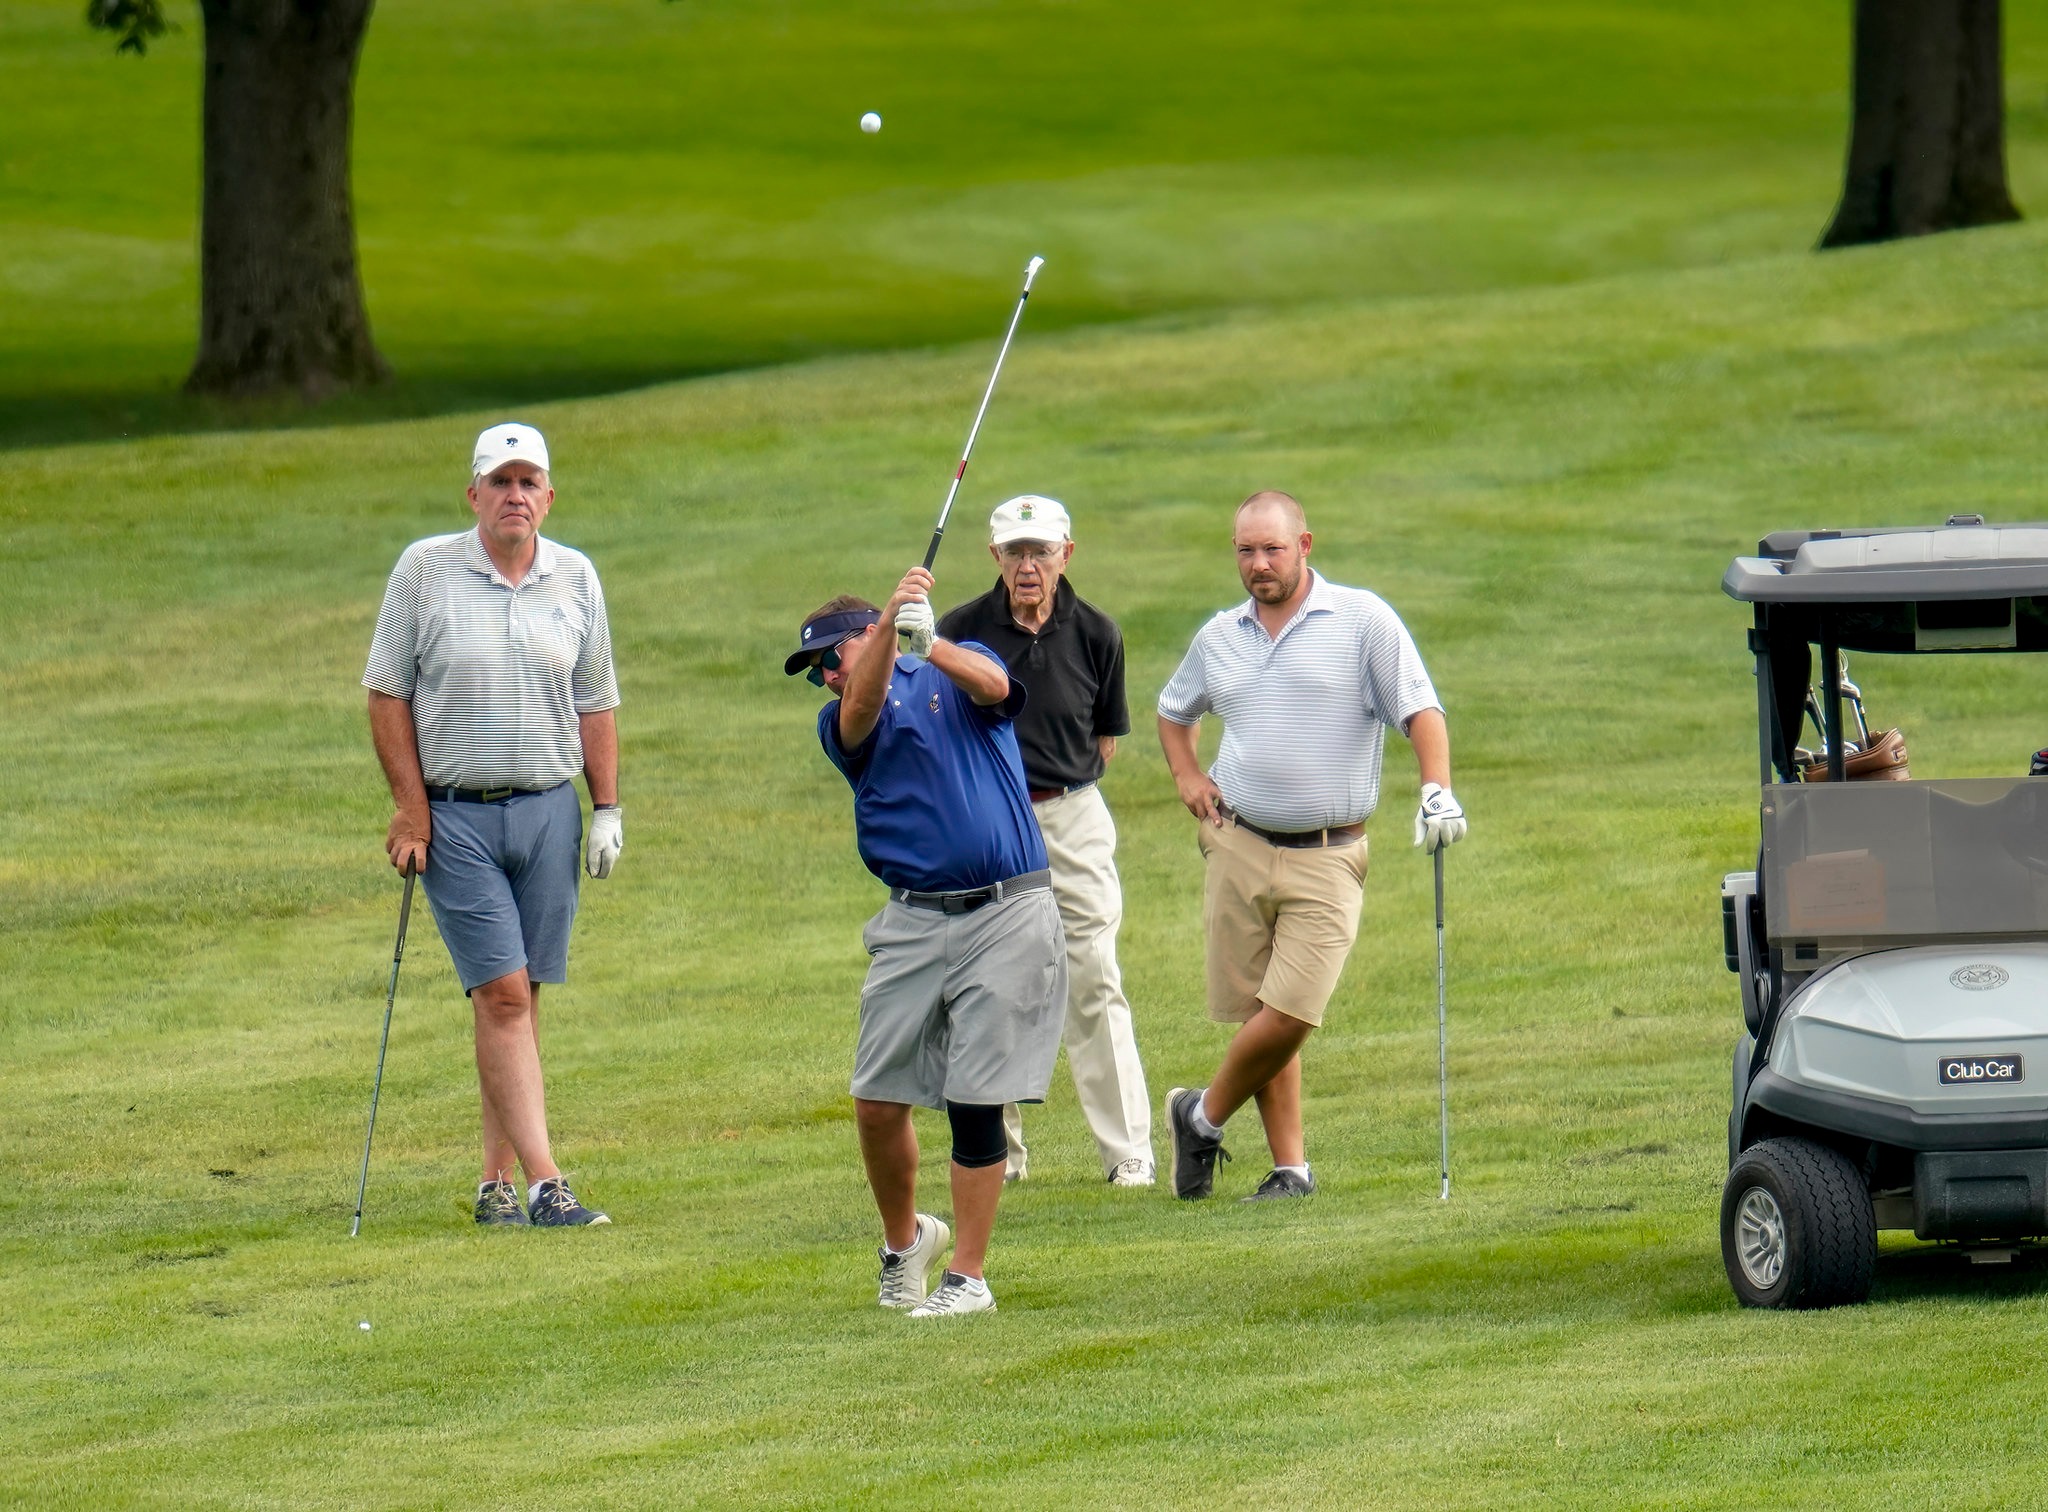 One man takes shot with golf club, while three male companions watch.